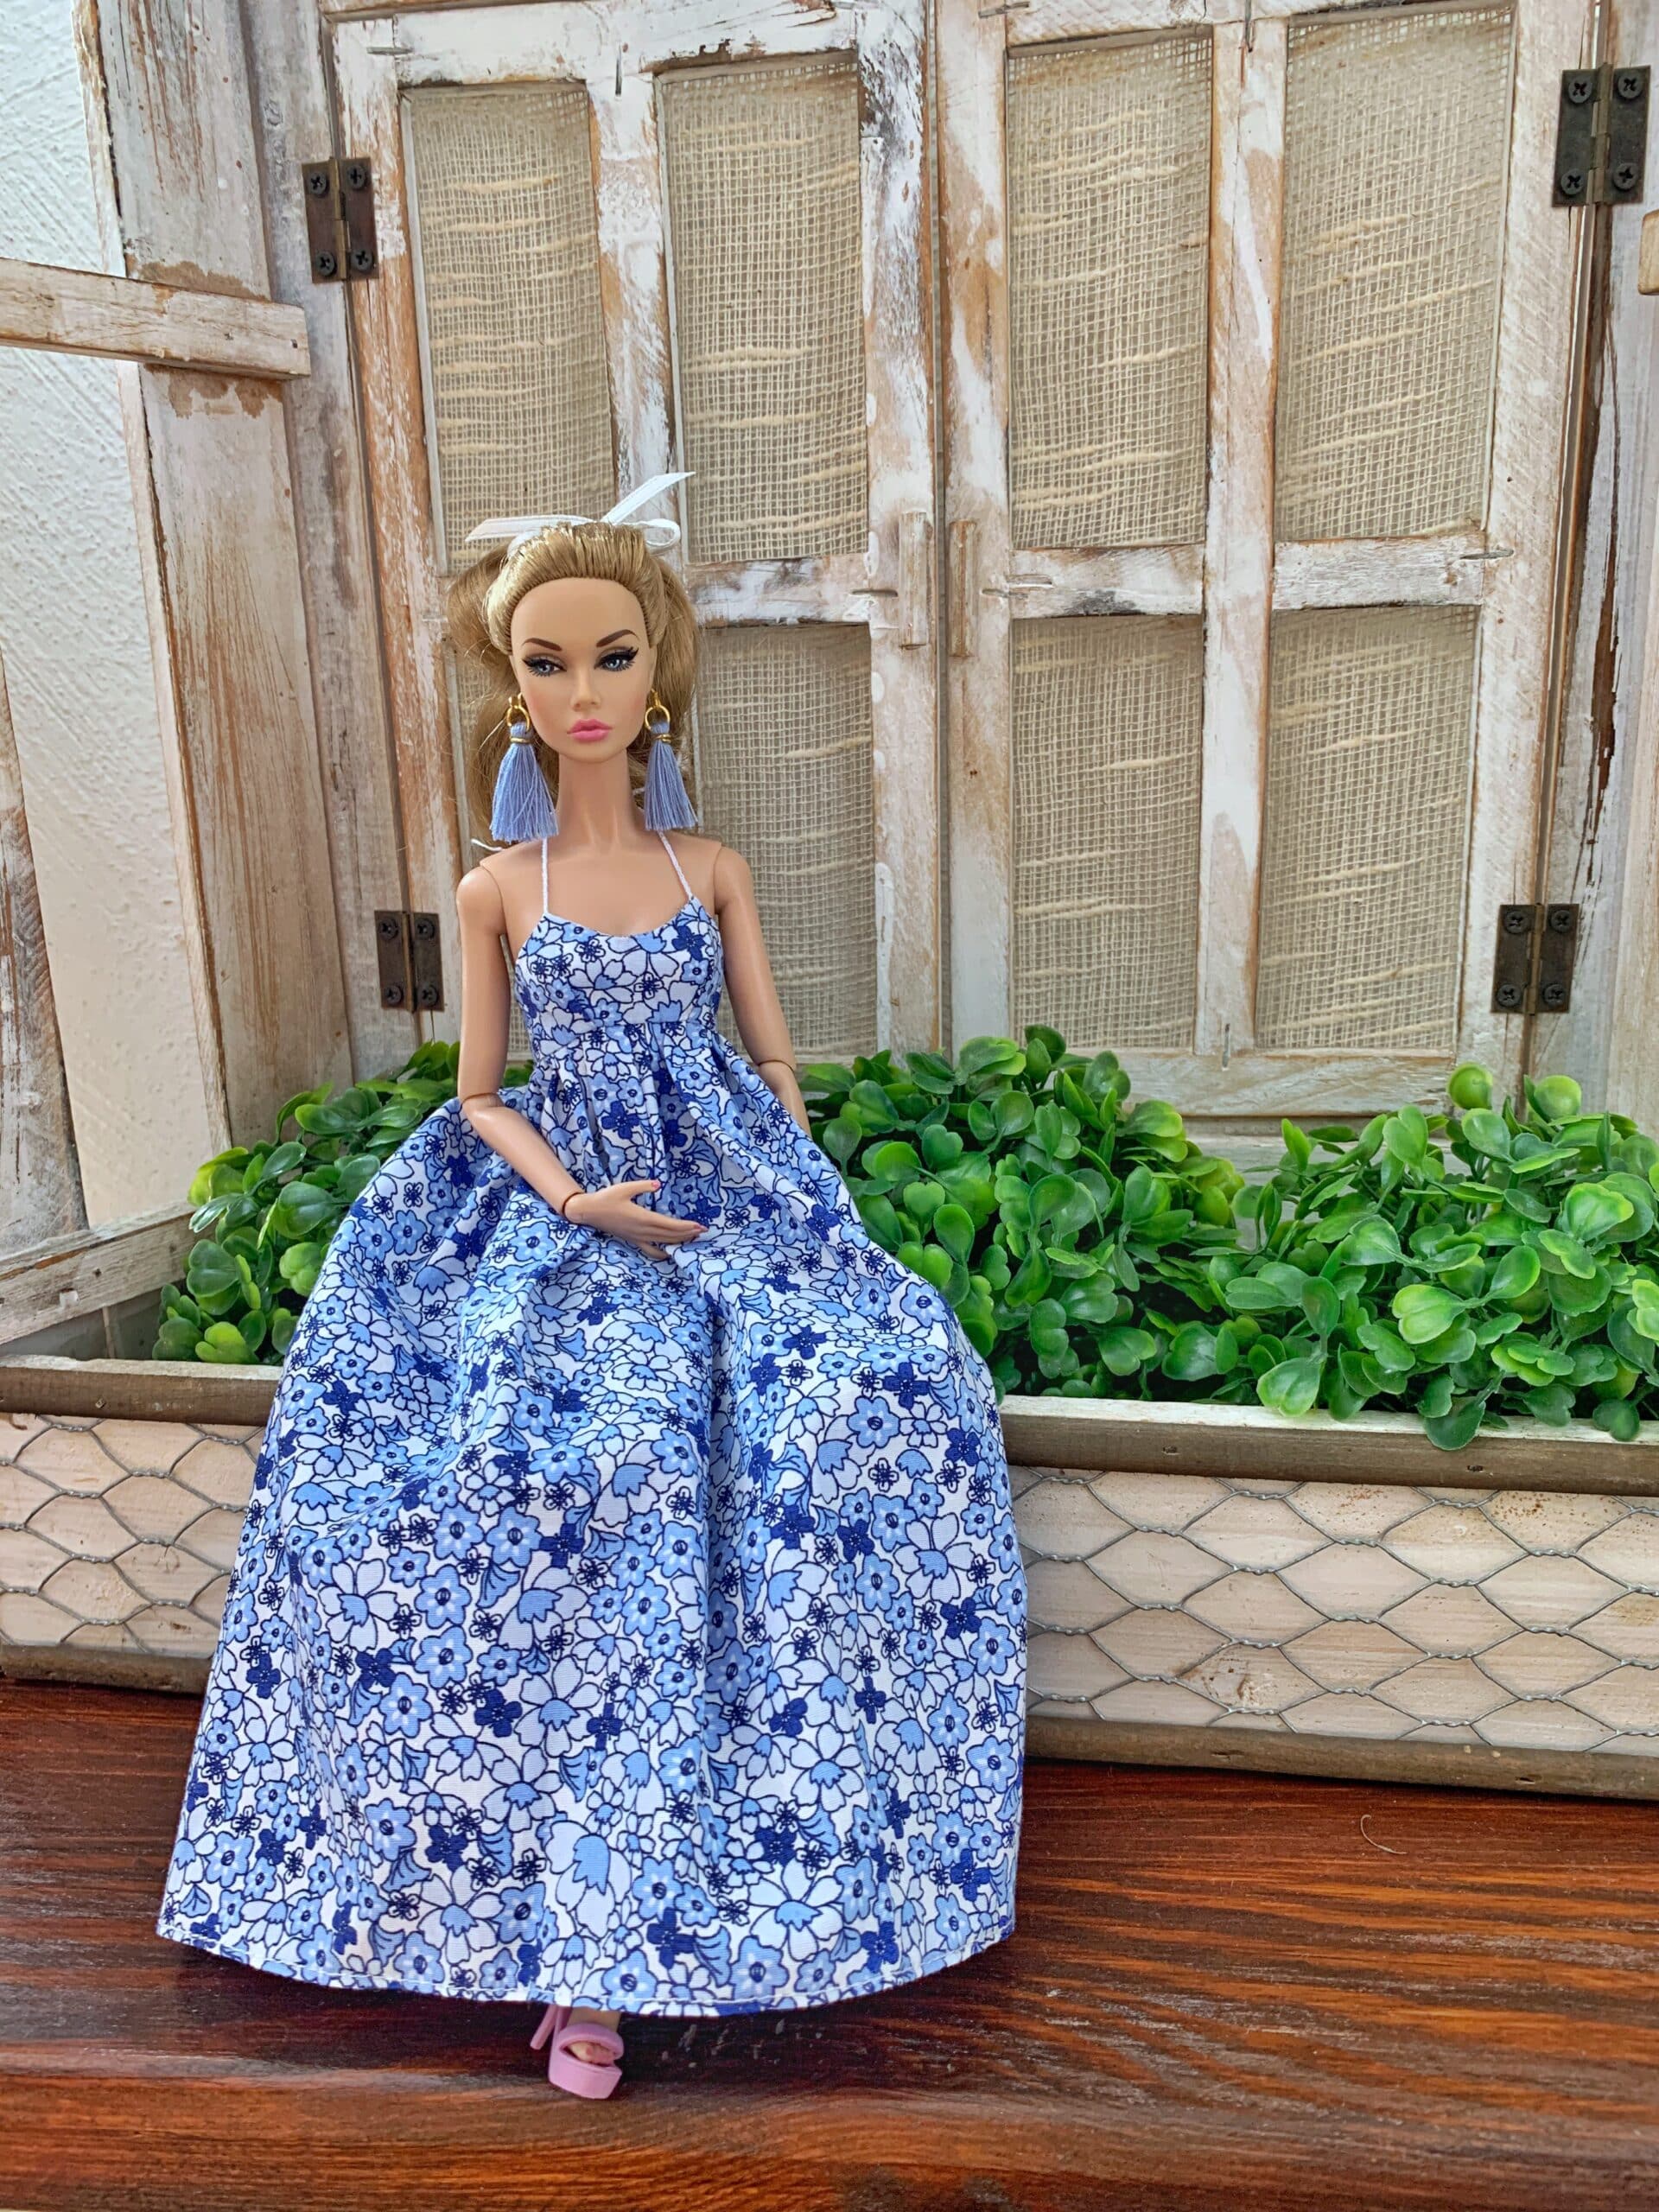 DIY Barbie clothes - step-by-step sewing tutorial plus free printable  patterns in PDF and SVG 